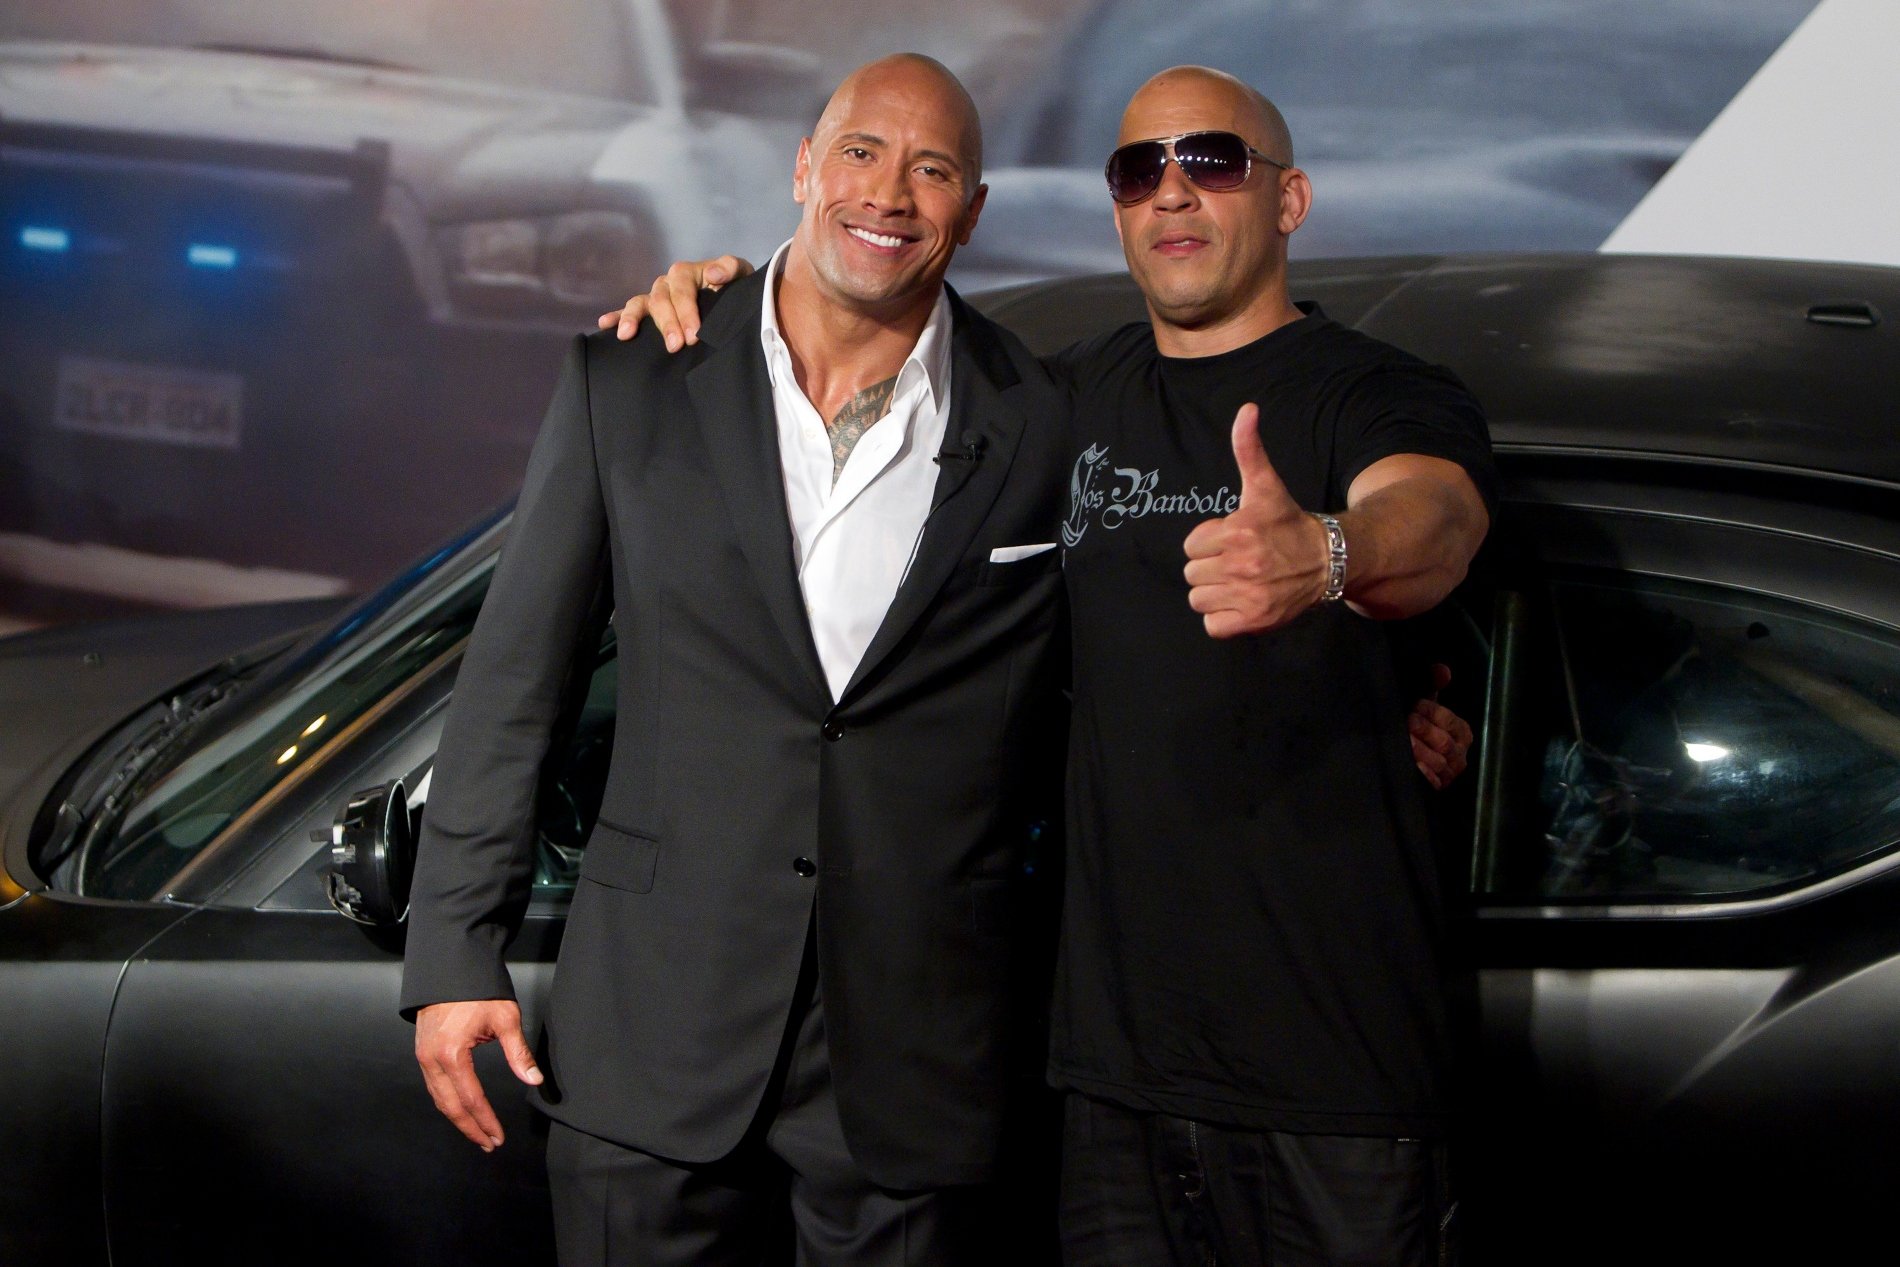 Dwayne 'The Rock' Johnson and Vin Diesel at 'Fast 5' premiere in Brazil